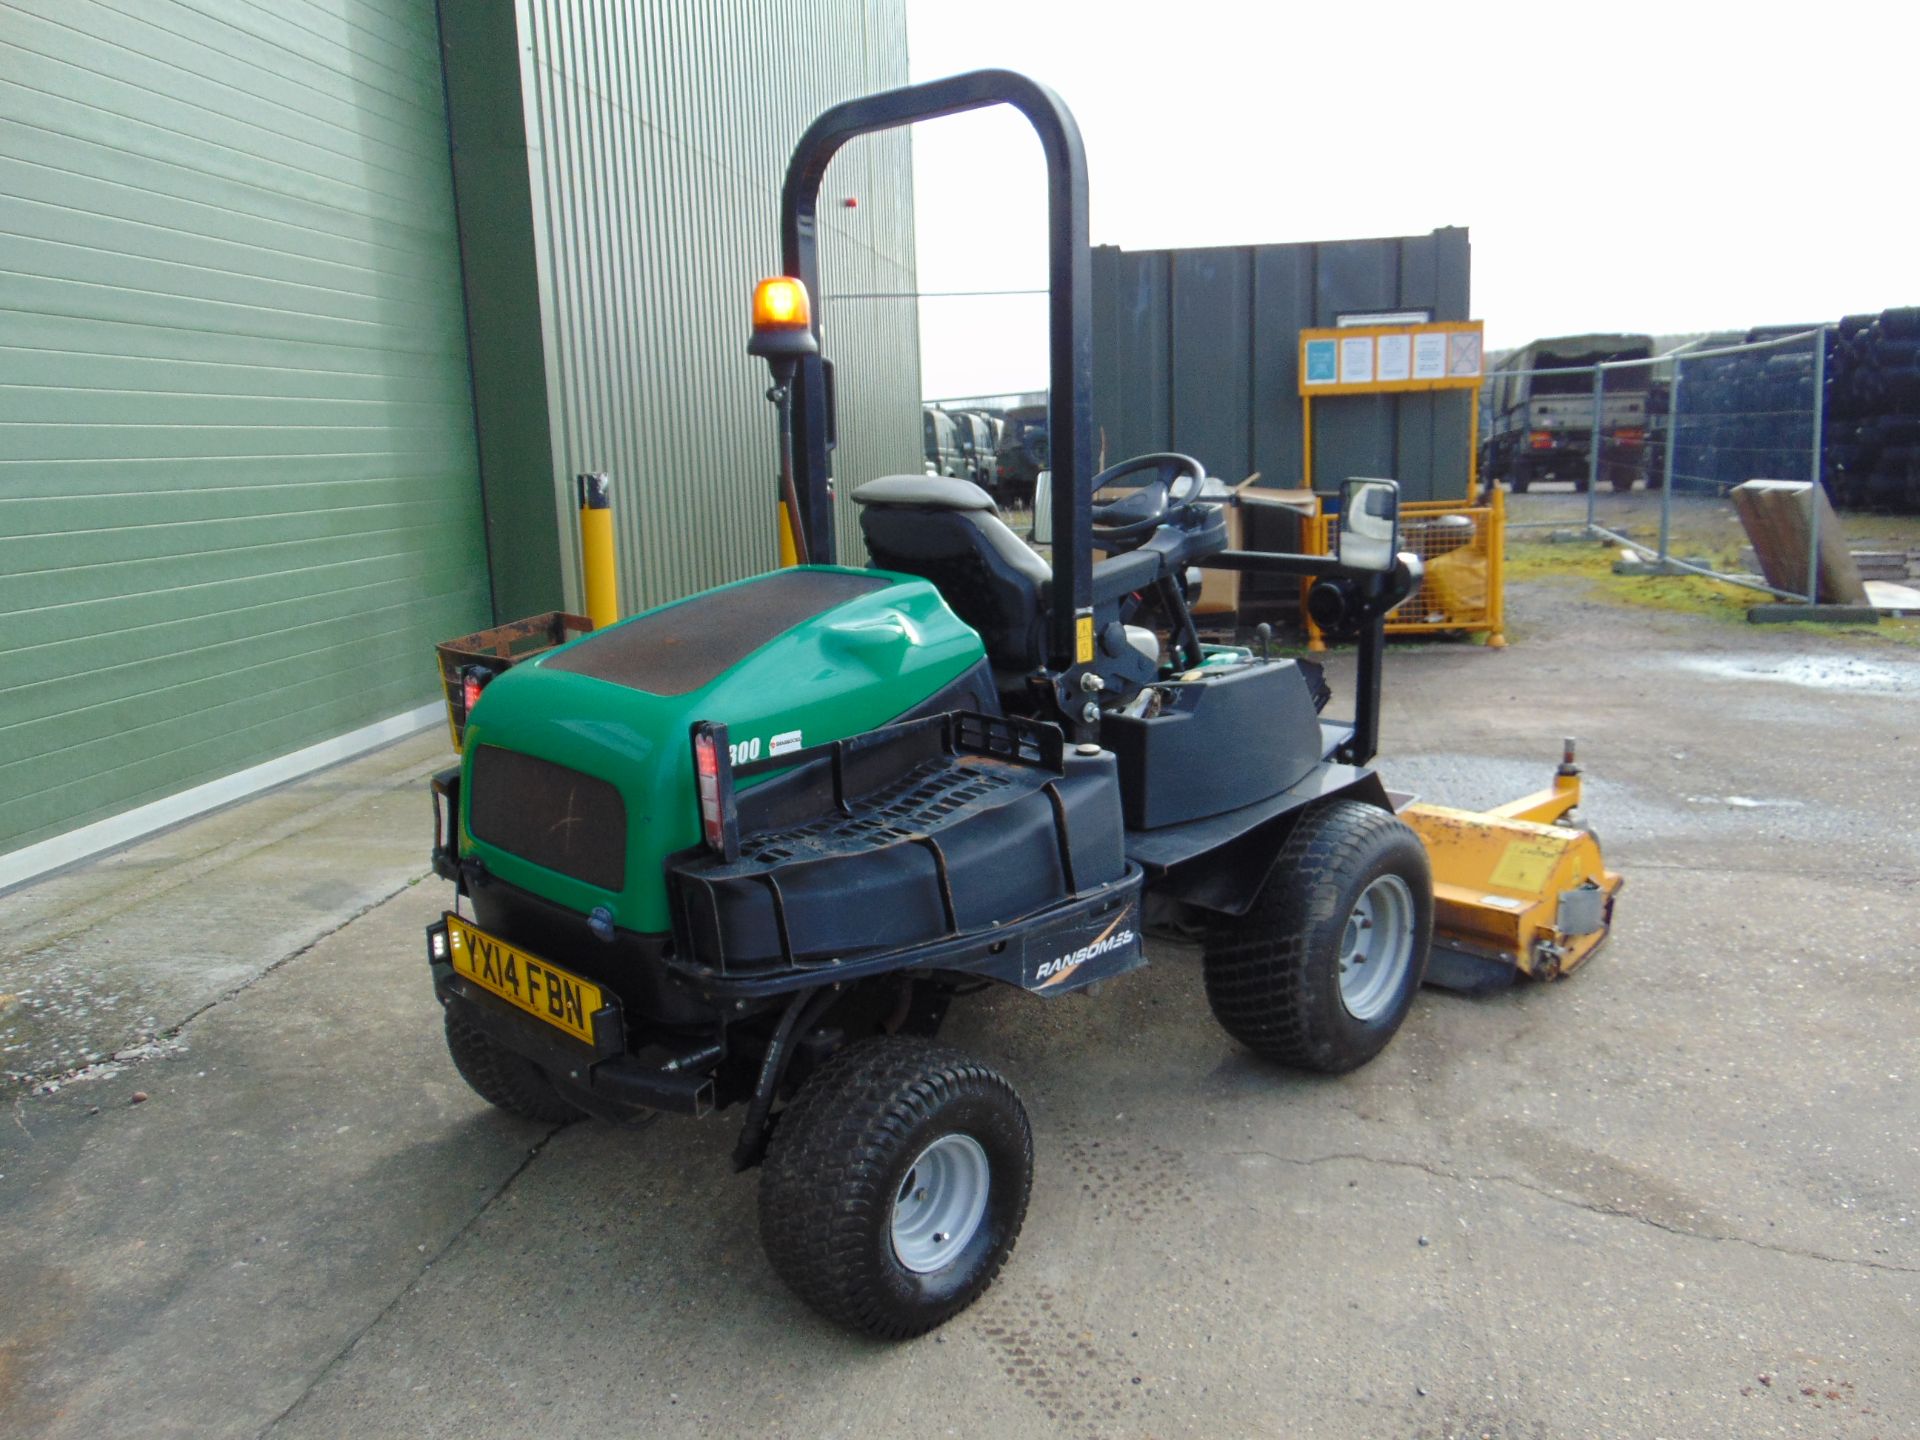 2014 Ransomes HR300 C/W Muthing Outfront Flail Mower ONLY 2,203 HOURS! - Image 7 of 26